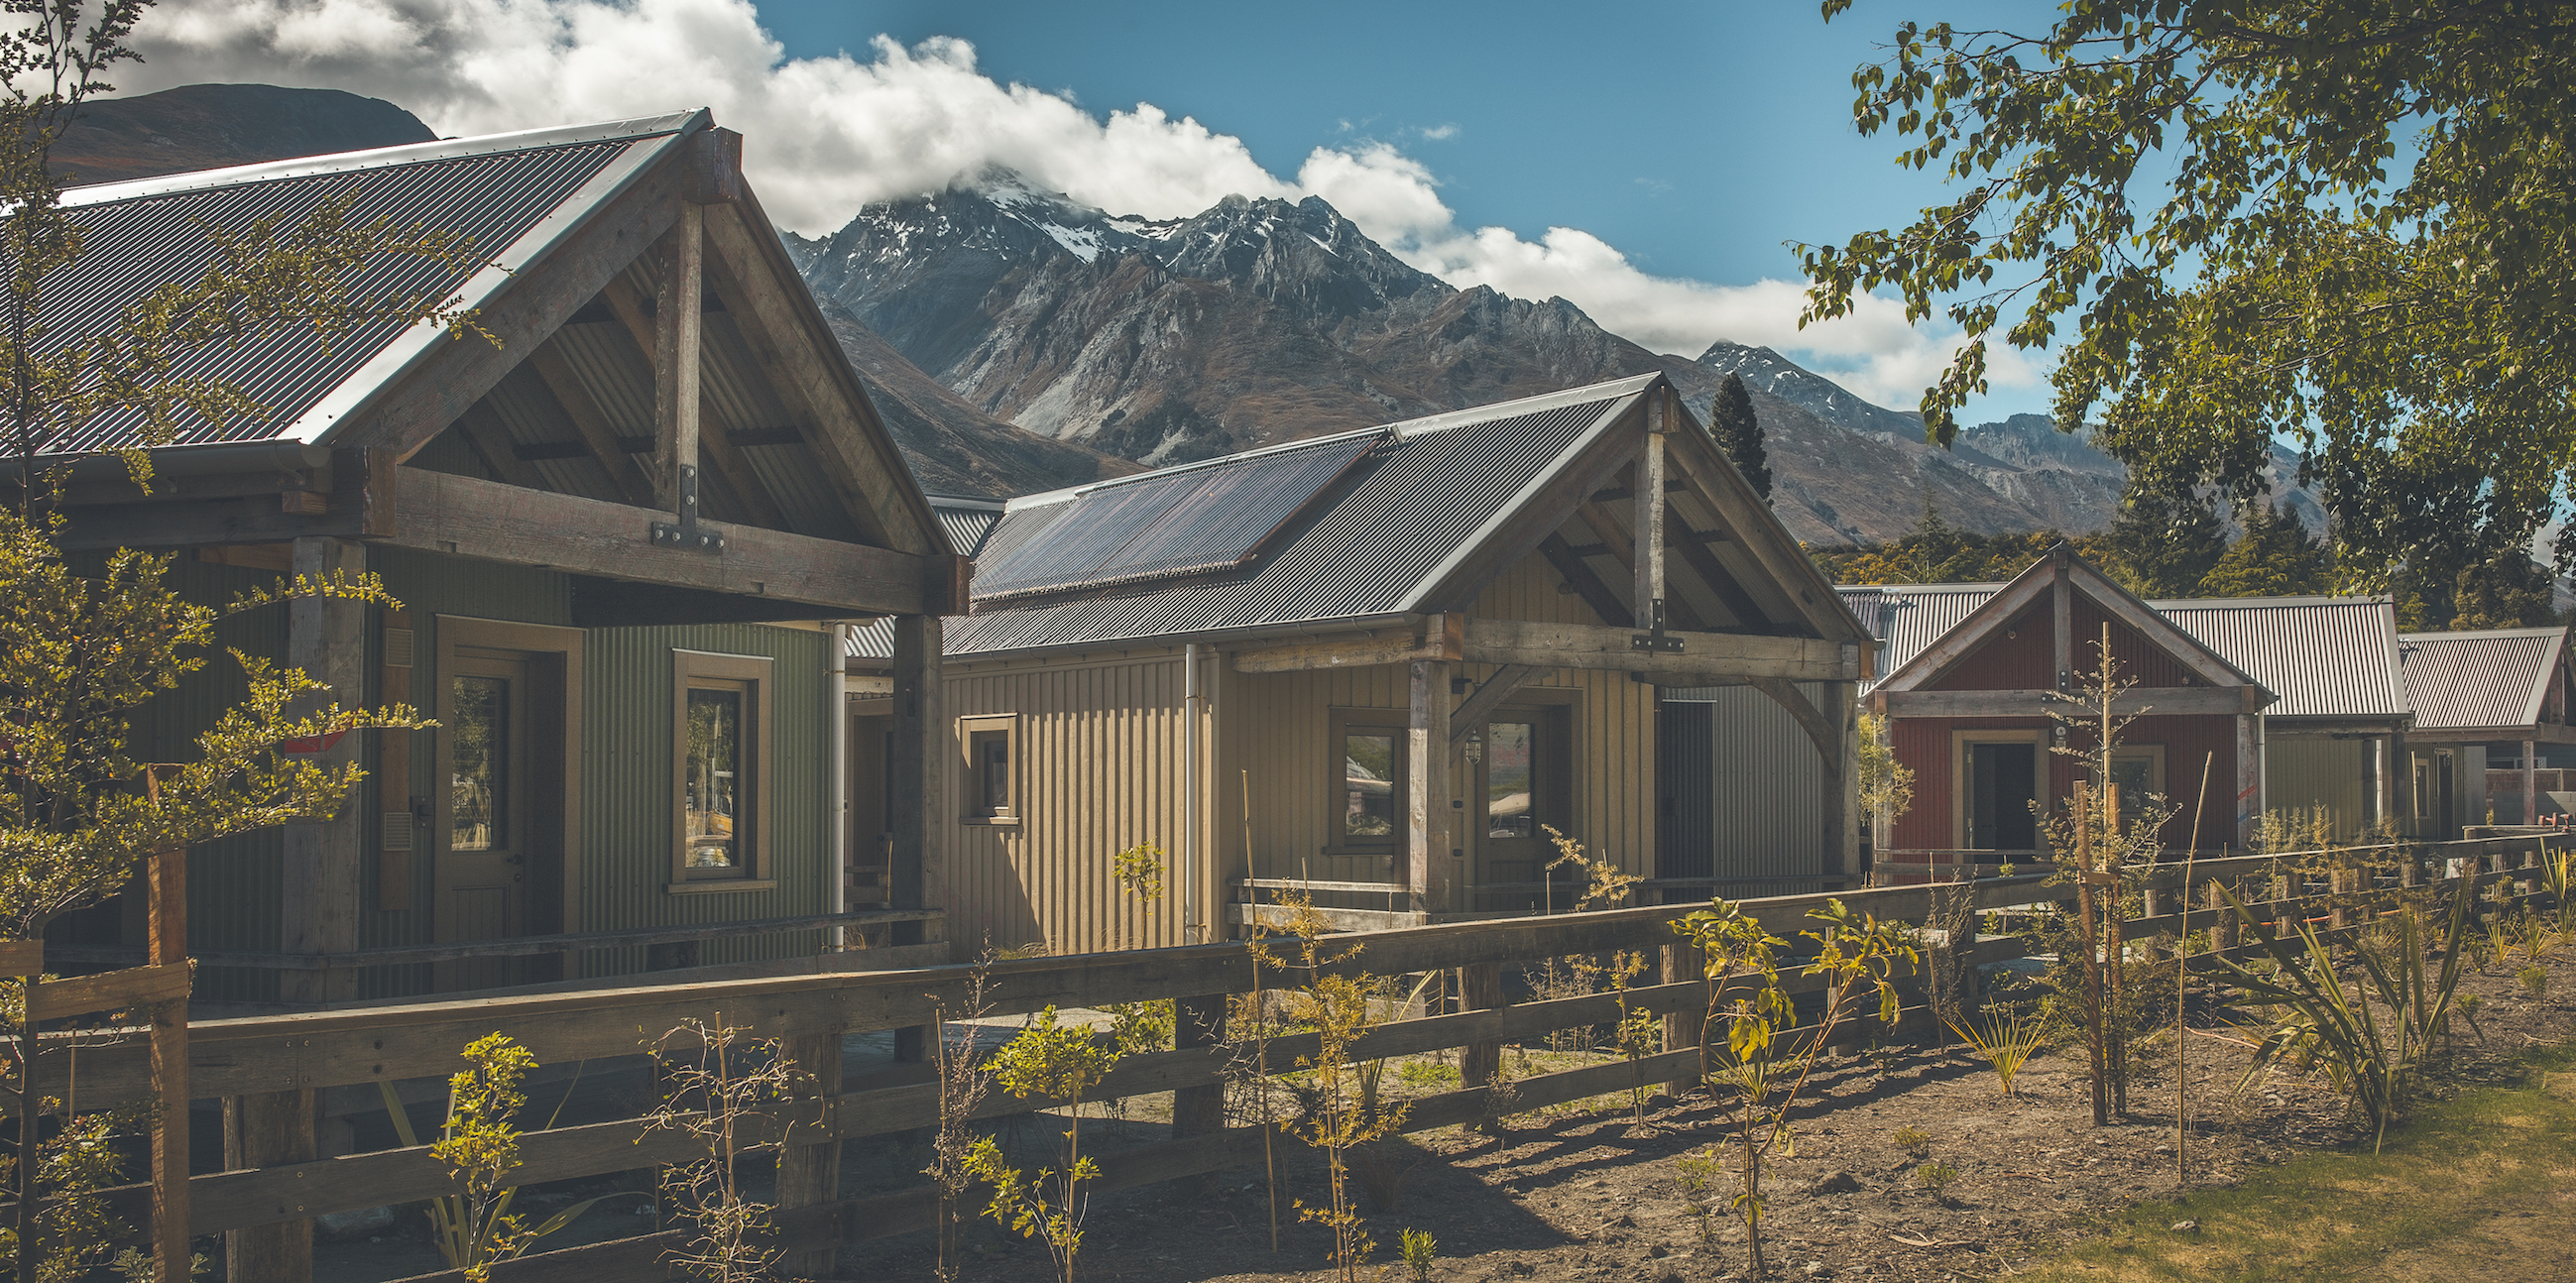 Camp Glenorchy's welcoming cabin exterior